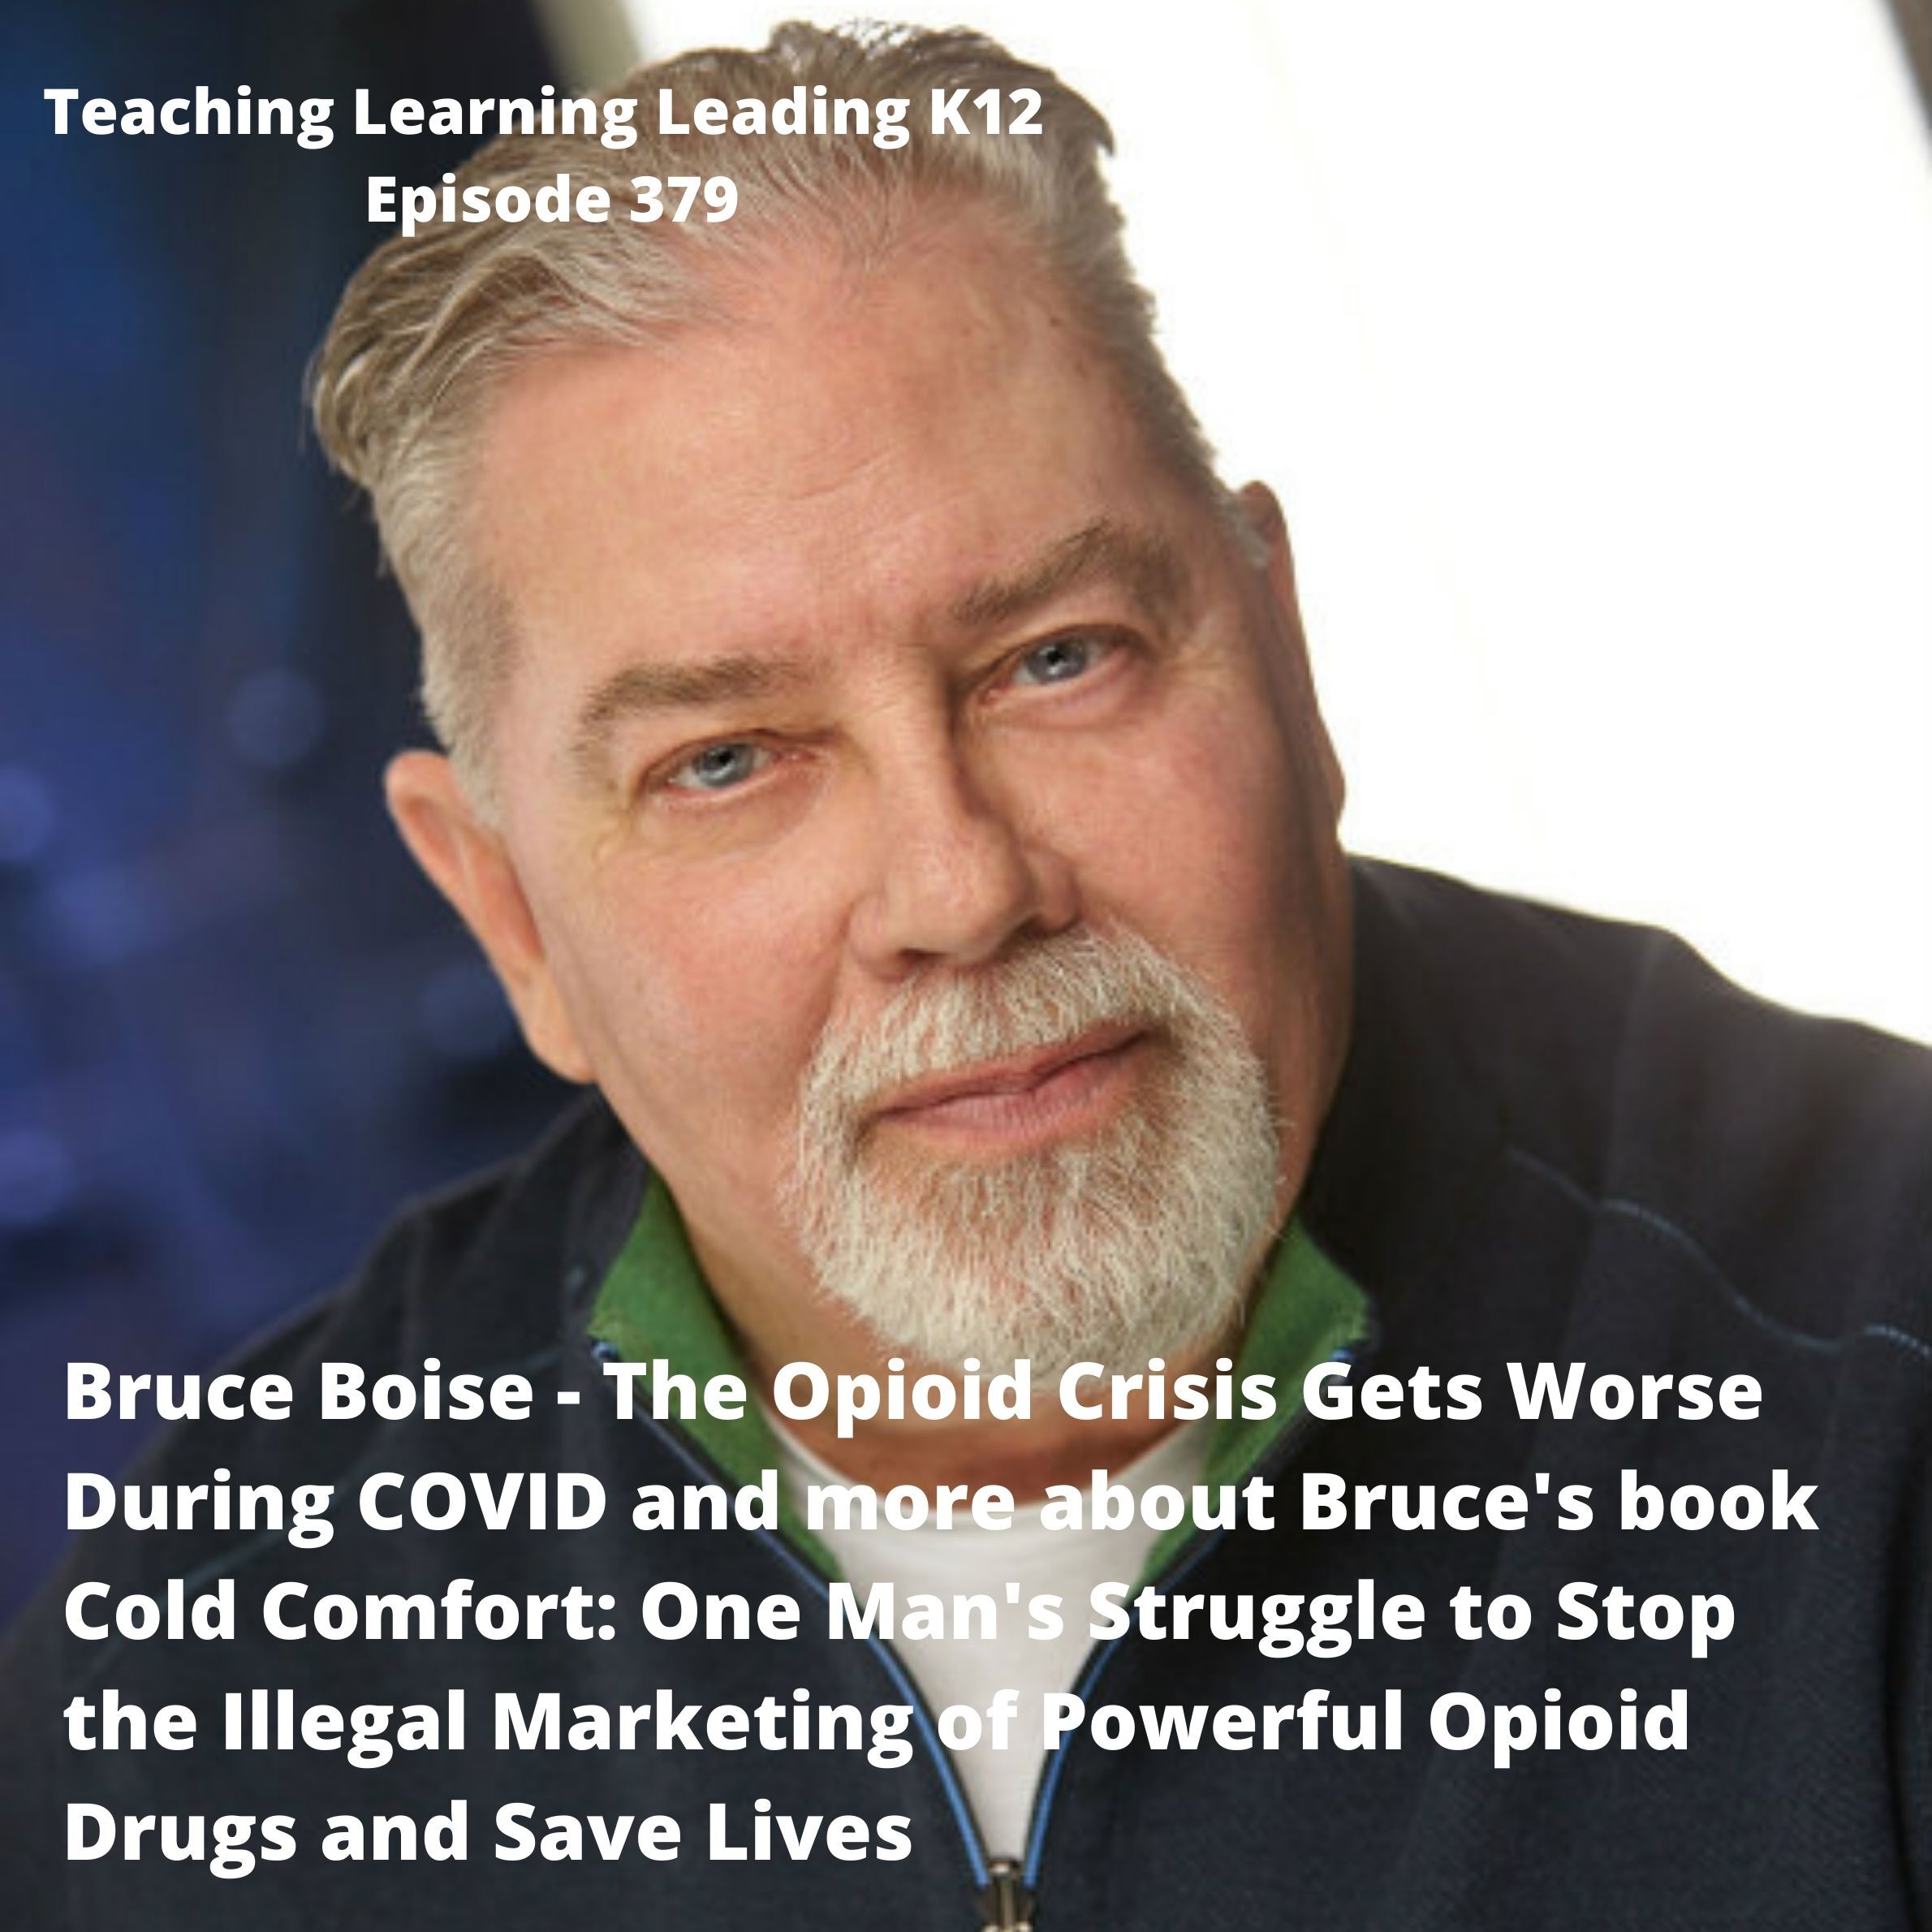 Bruce Boise - Opioid Crisis Gets Worse During COVID and His Book Cold Comfort: One Man's Struggle to Stop the Illegal Marketing of Powerful Opioid Drugs and Save Lives - 379 Image